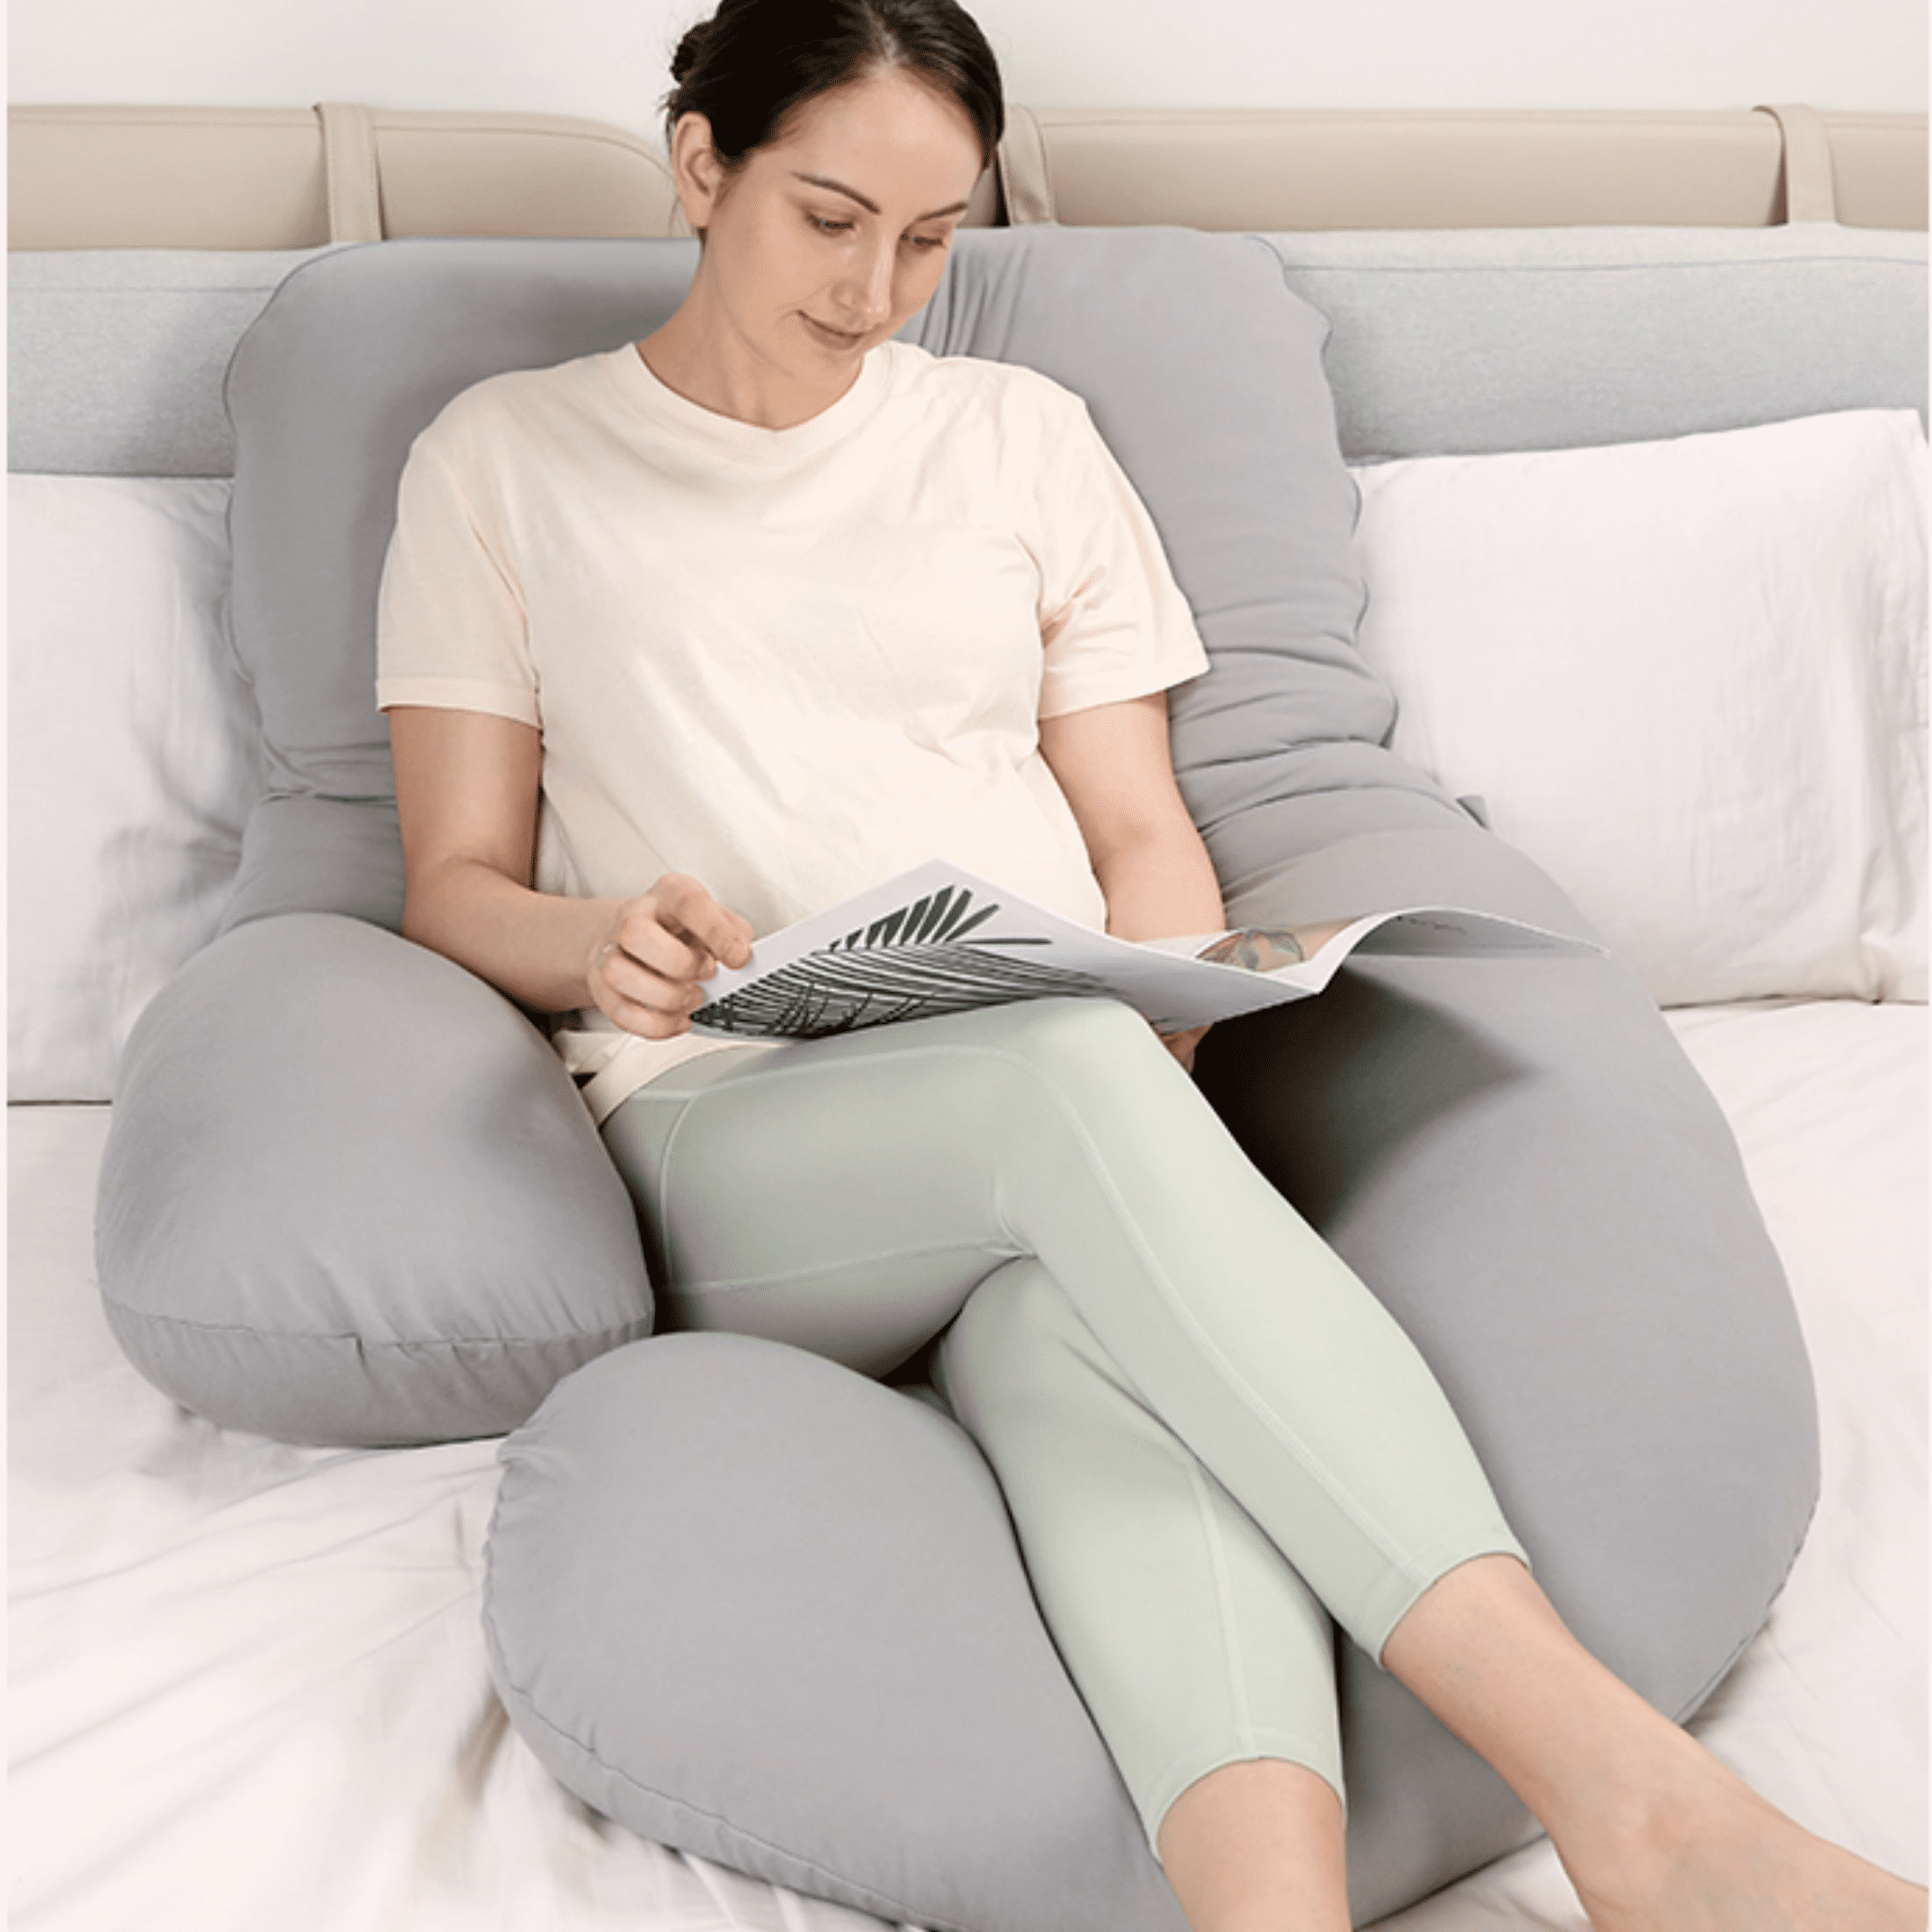 Body Pregnancy Pillow That's Soft, Comfortable, and Cooling